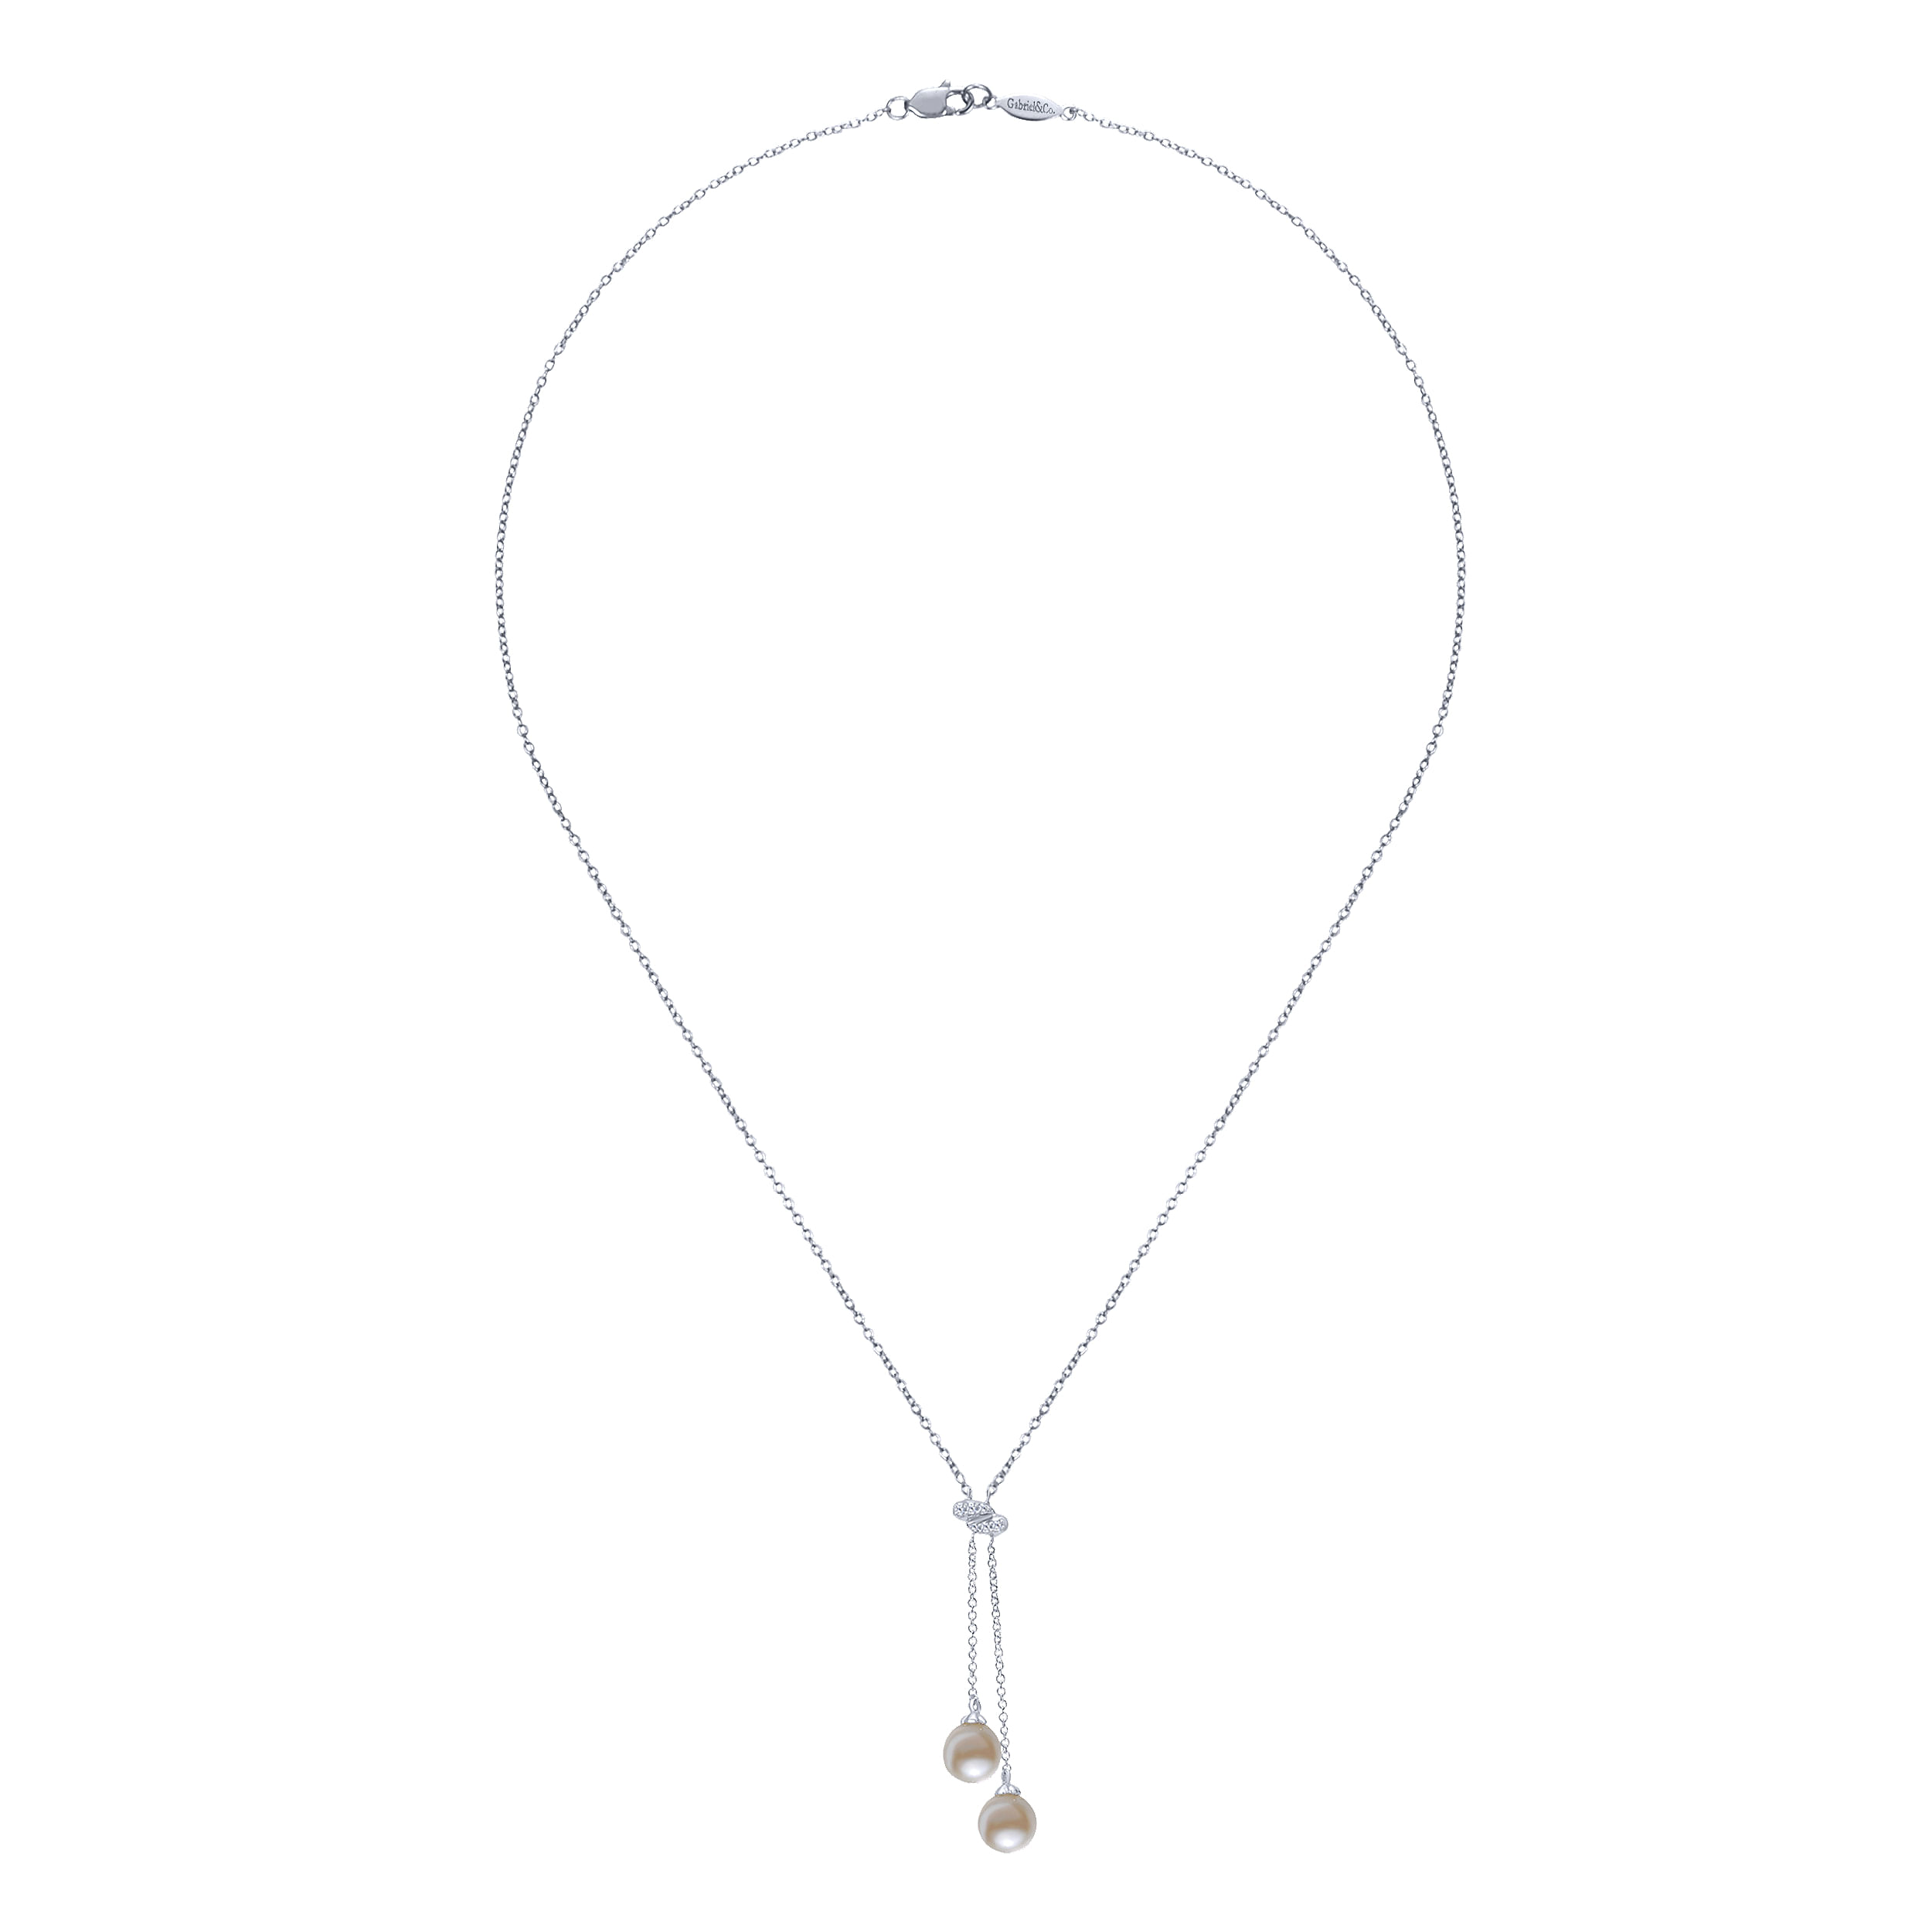 14K White Gold Diamond and Cultured Pearl Lariat Necklace